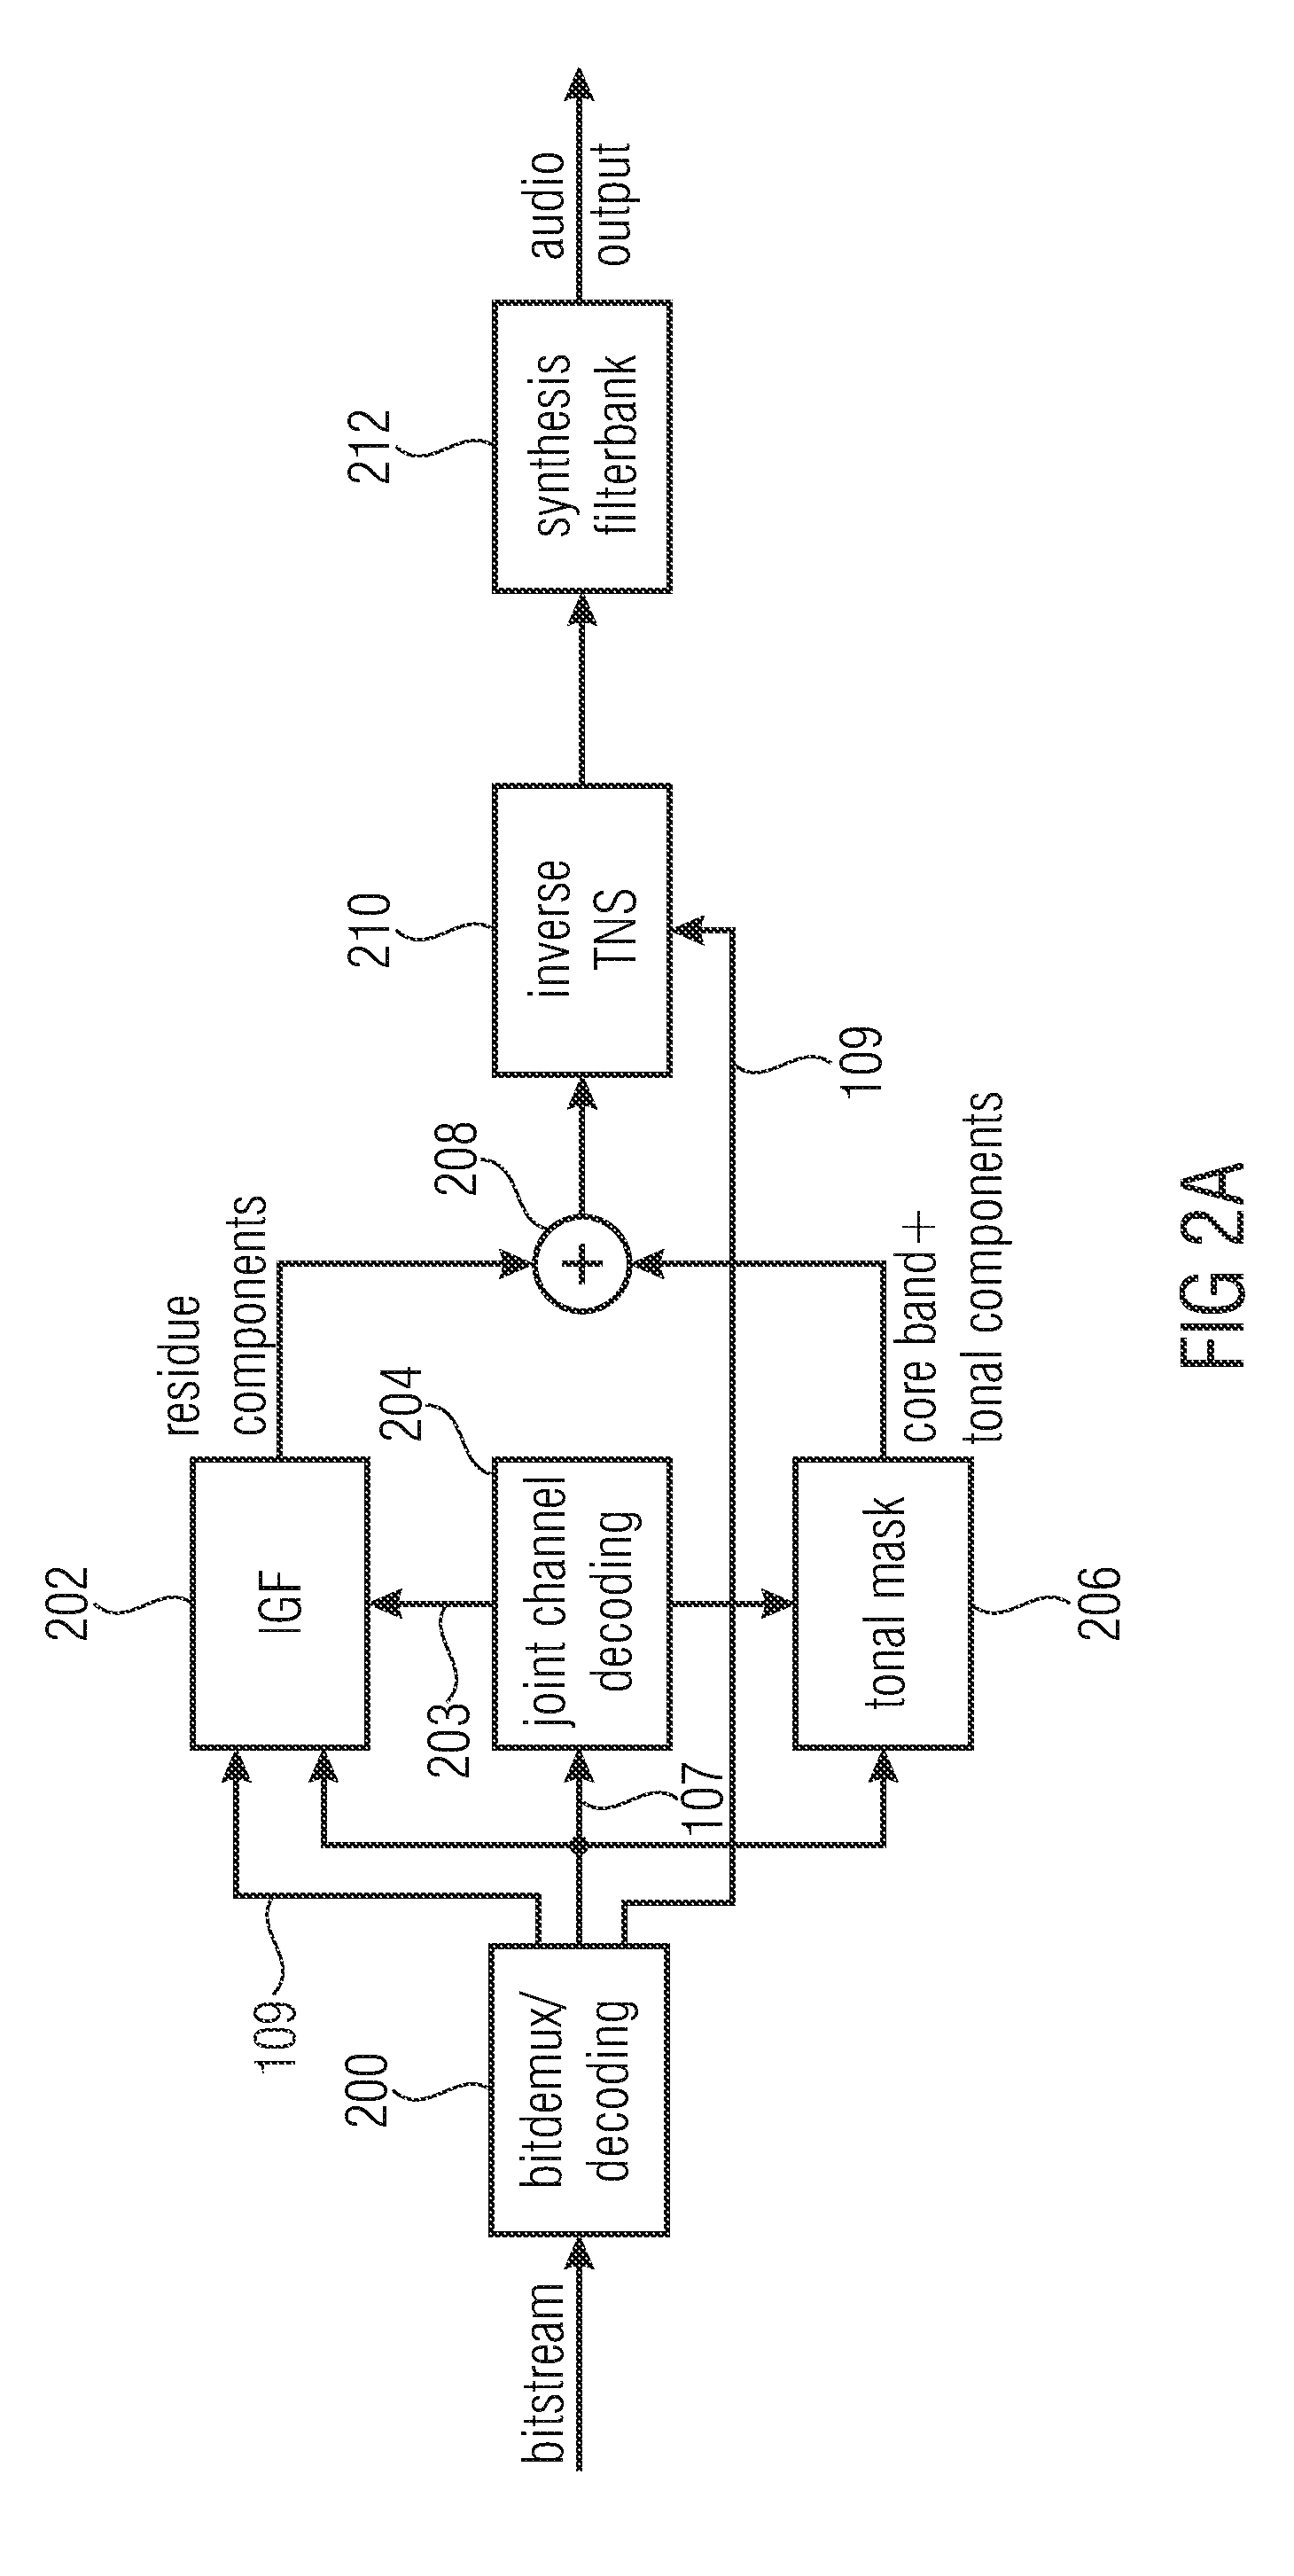 Apparatus and method for encoding and decoding an encoded audio signal using temporal noise/patch shaping